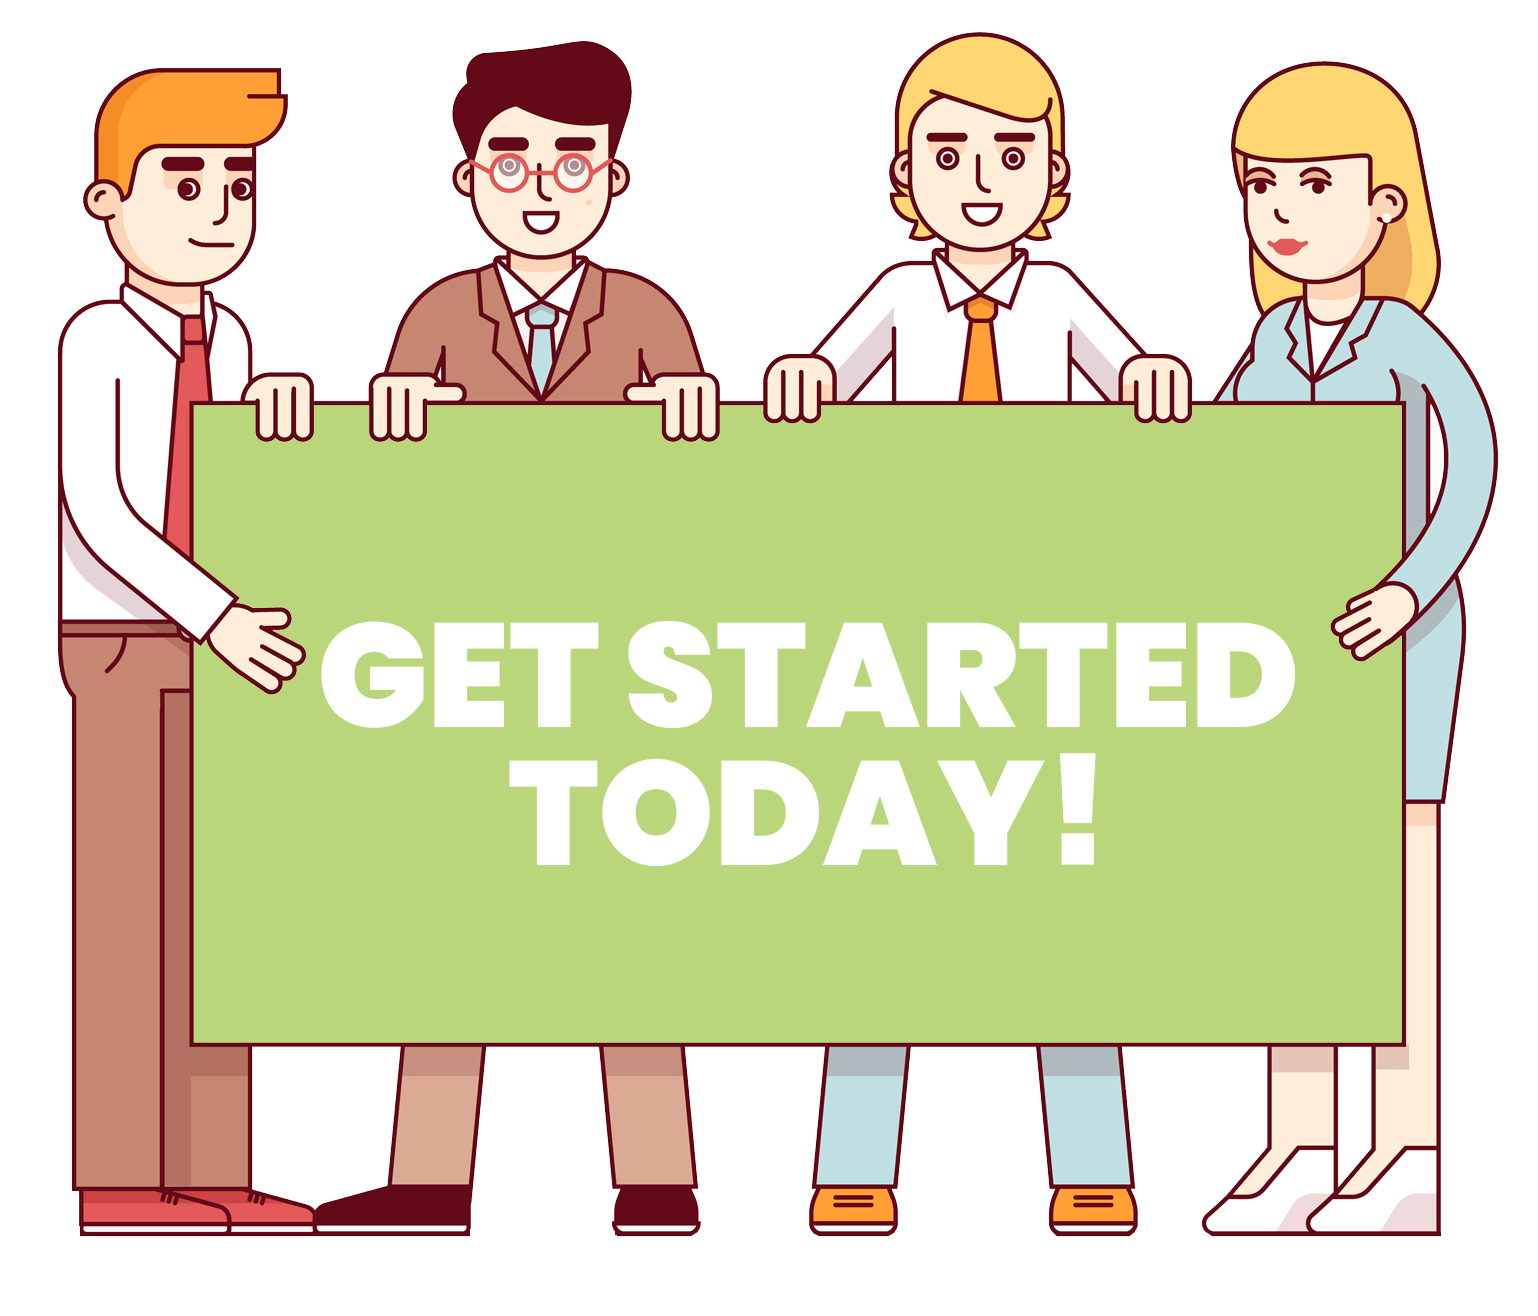 Get started today